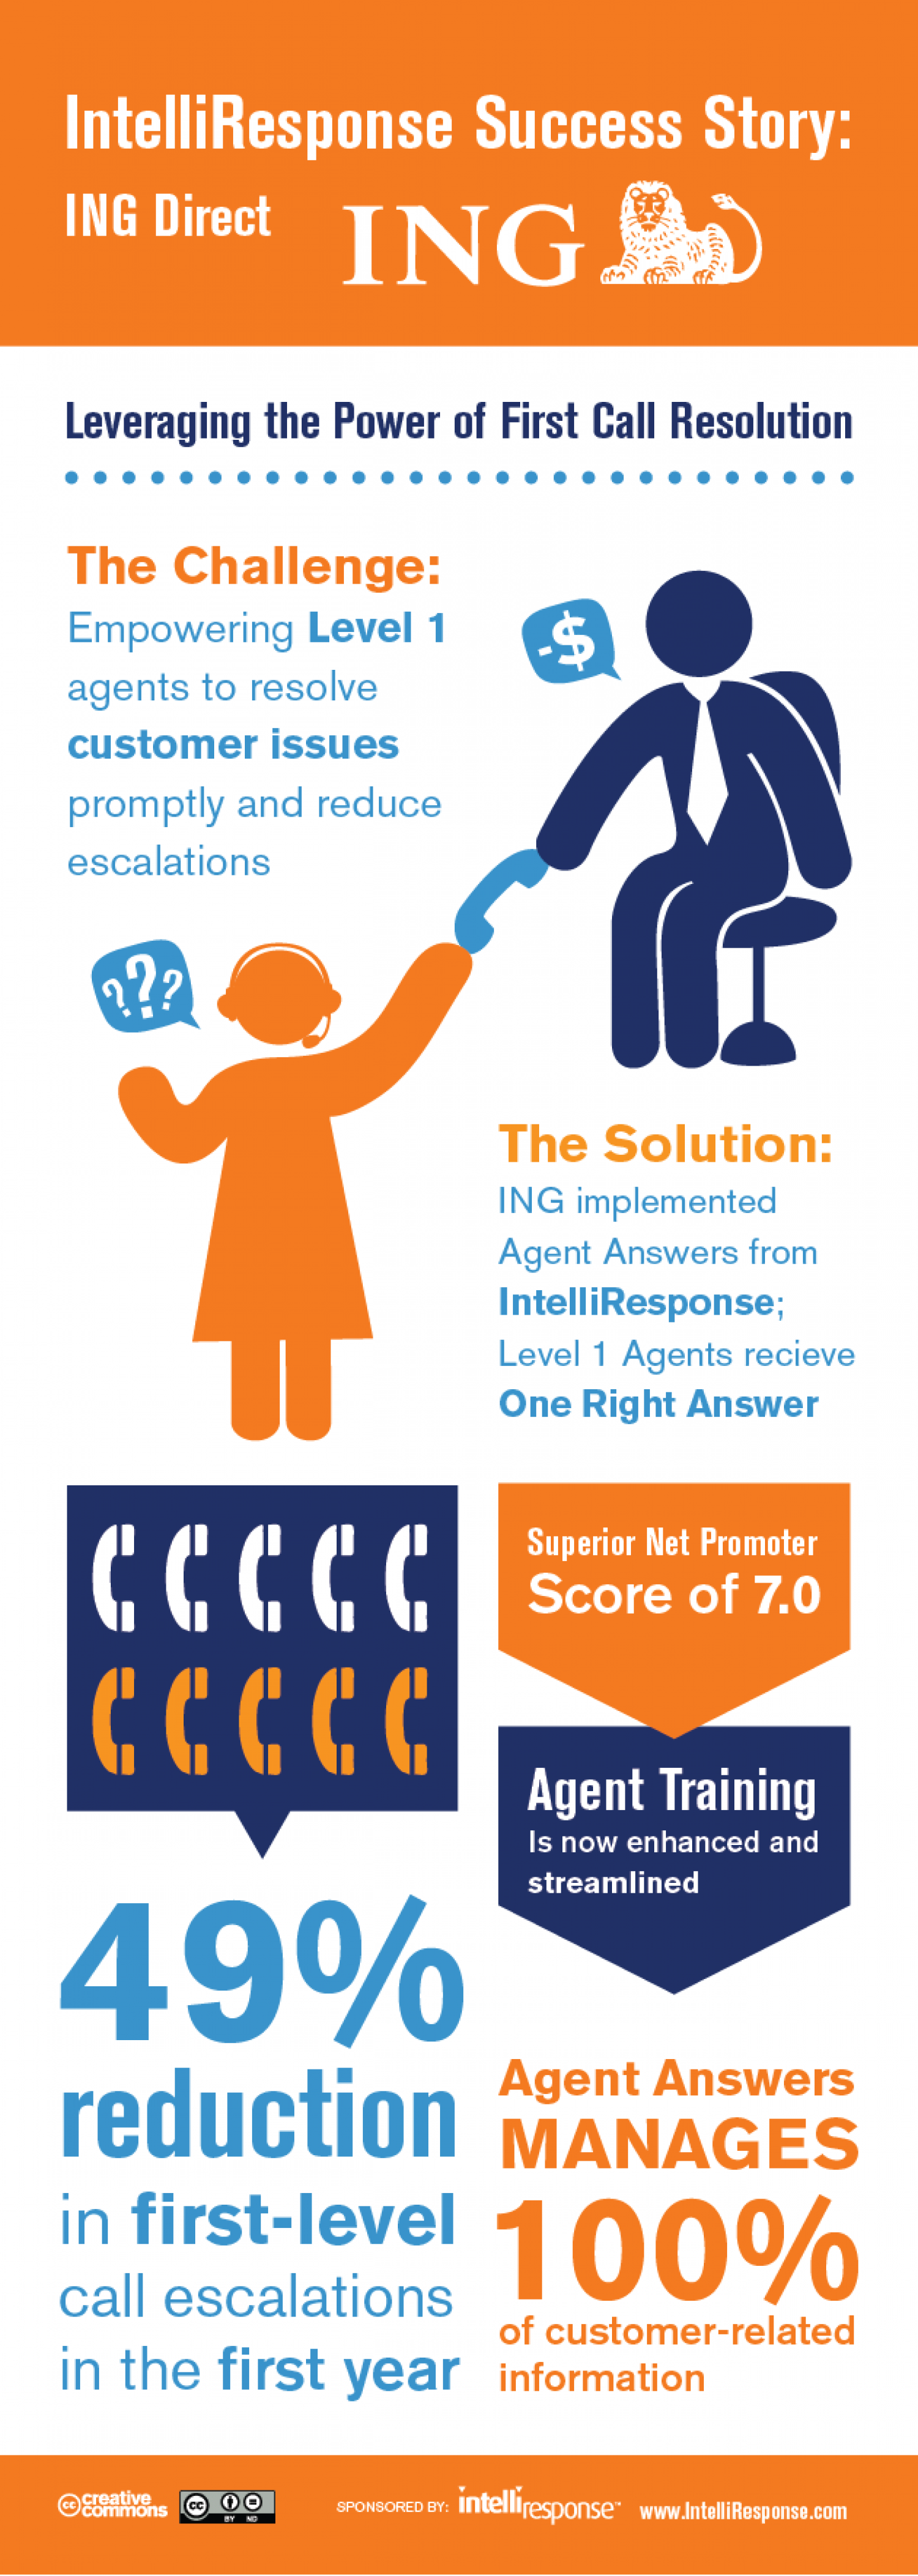 ING Bank Reduces Call Center Escalations By 50%! Infographic